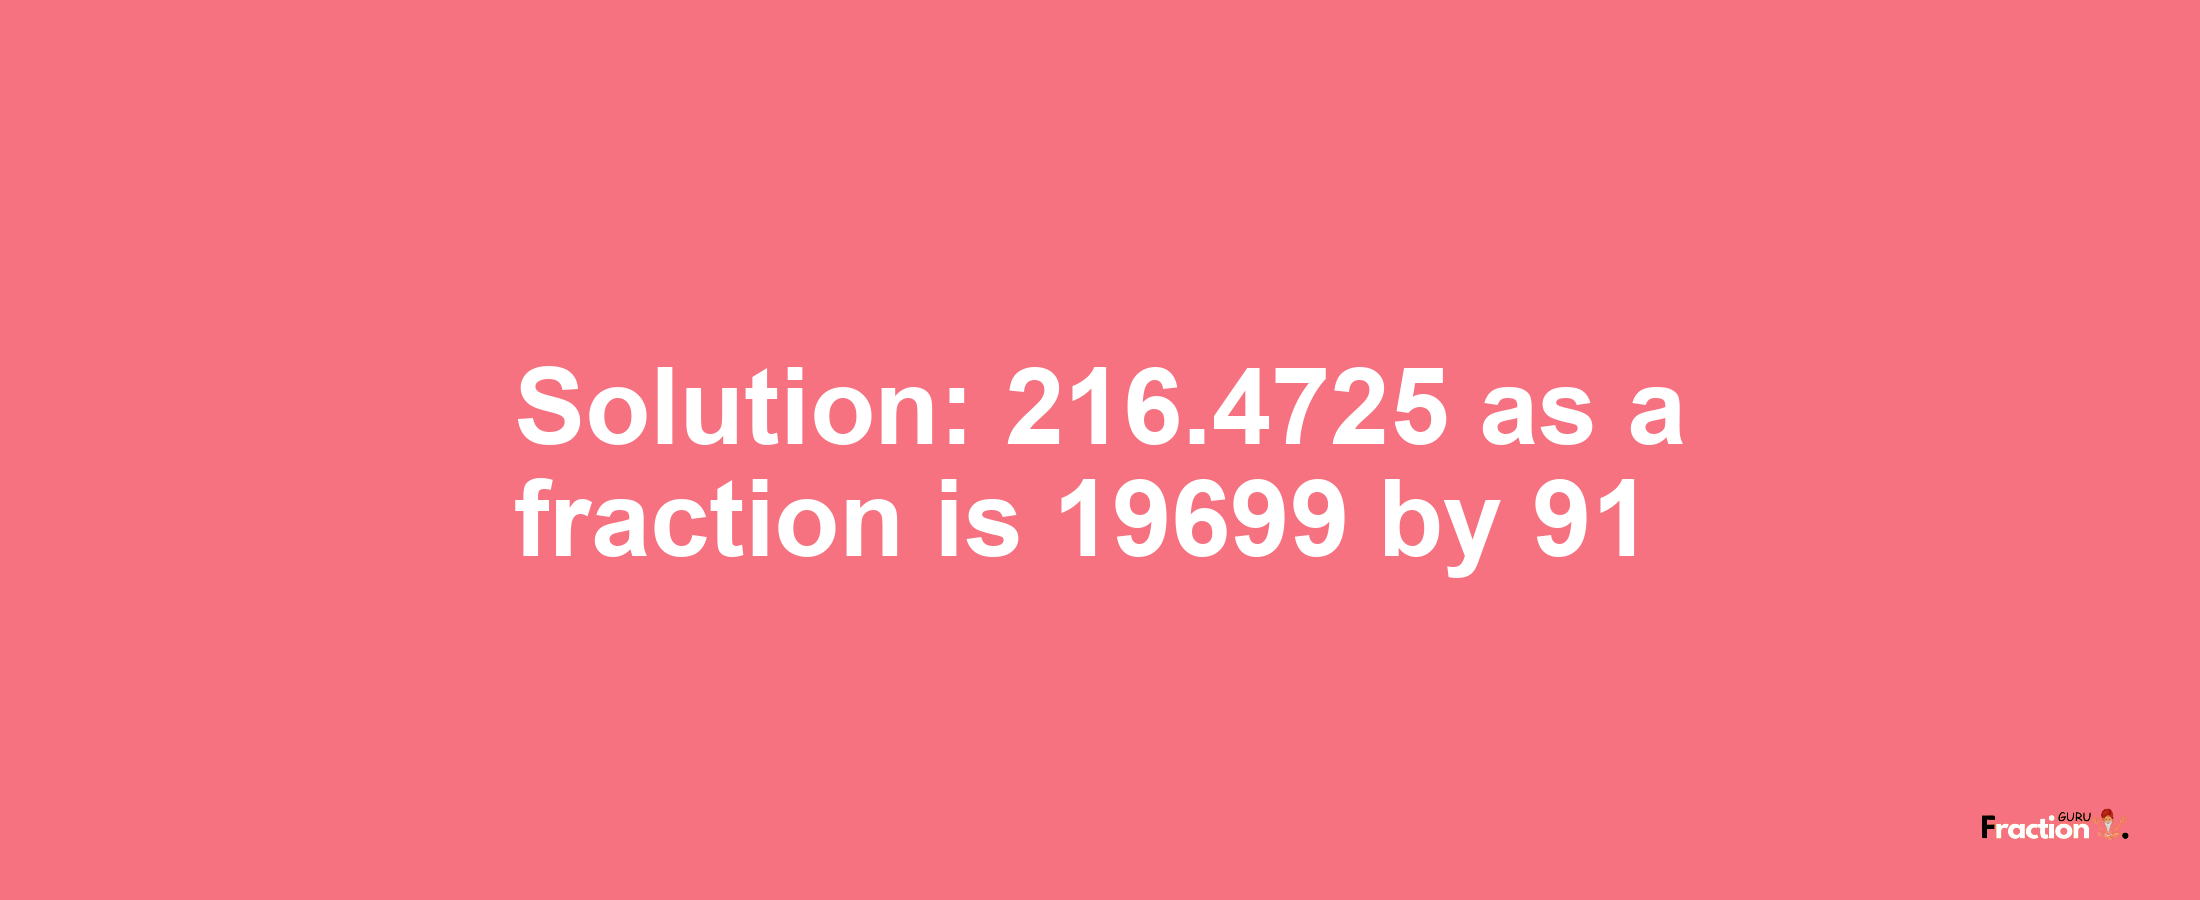 Solution:216.4725 as a fraction is 19699/91